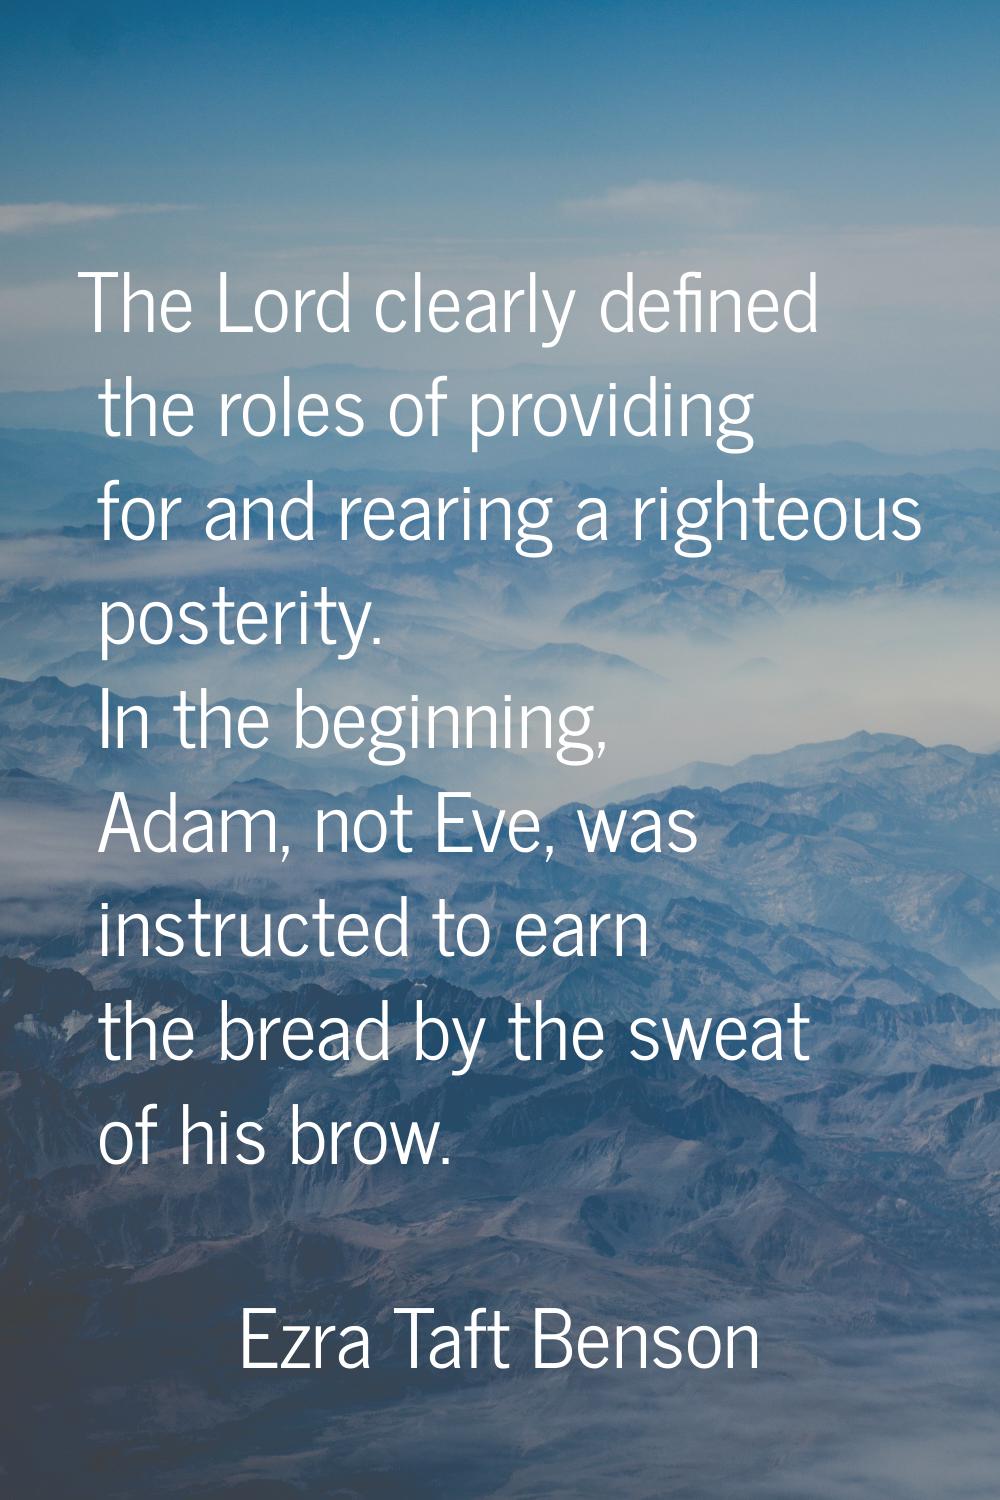 The Lord clearly defined the roles of providing for and rearing a righteous posterity. In the begin